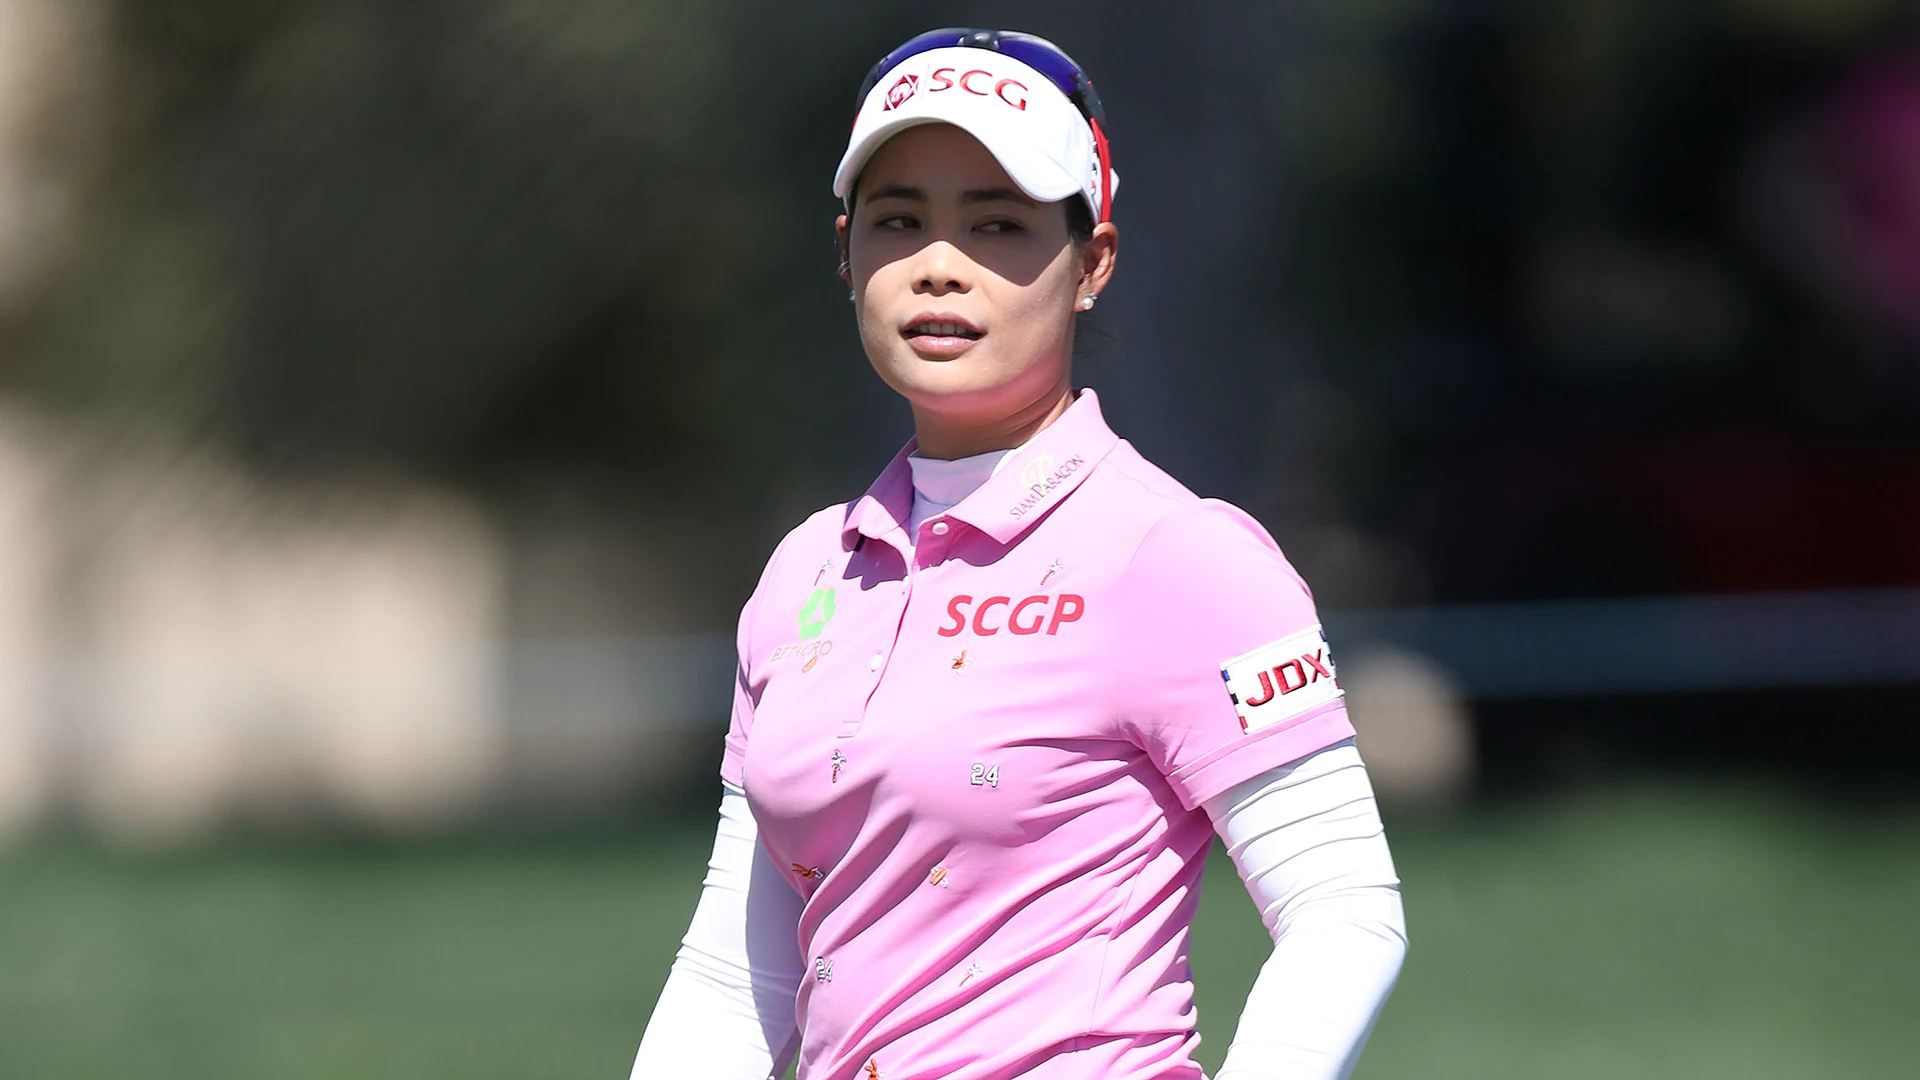 Round 1 of the Hugel-Air Premia L.A. Open on the LPGA Tour